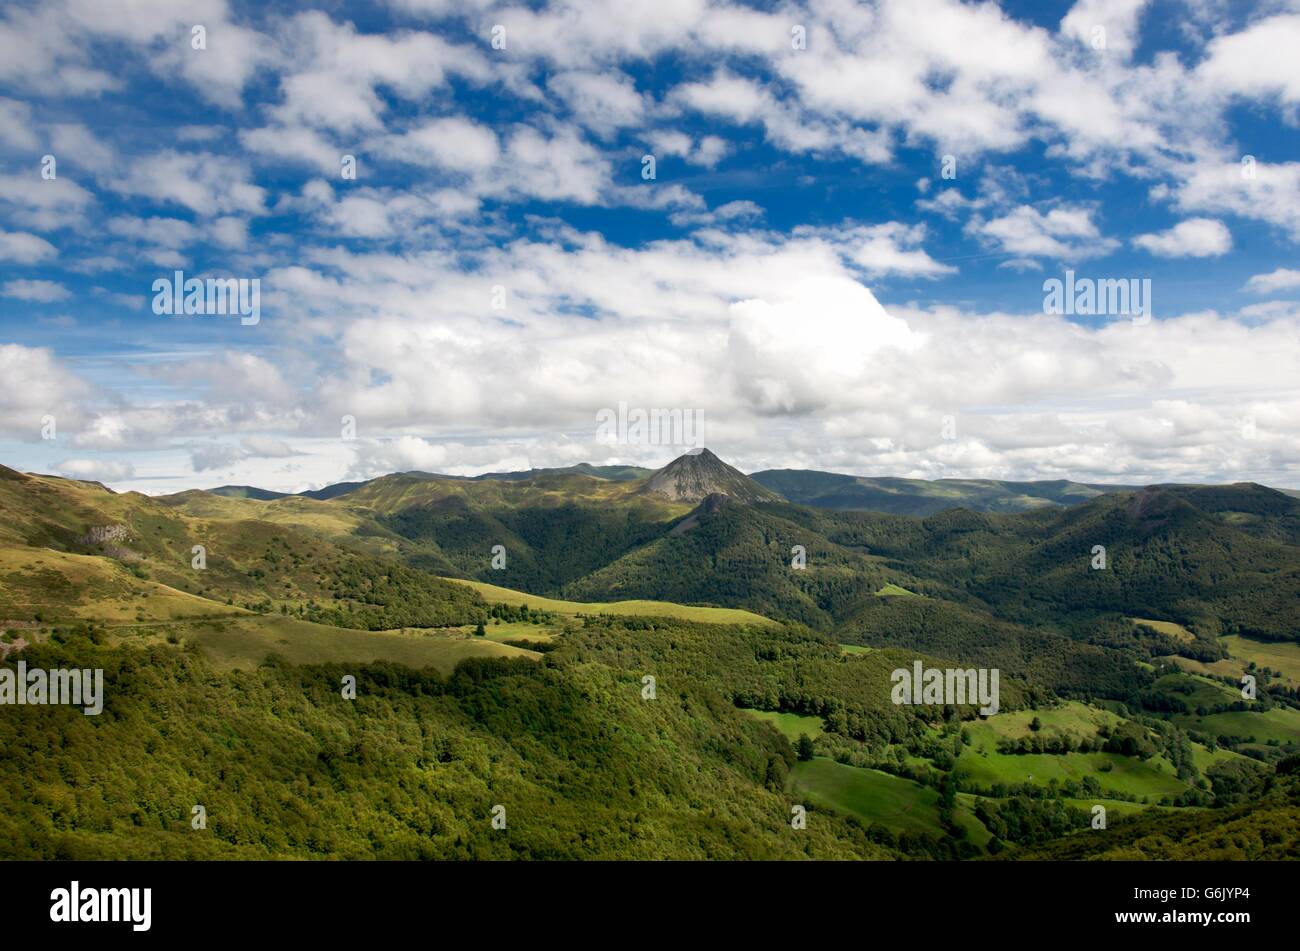 The mountains Puy Griou and Monts du Cantal, Département Cantal, Auvergne region, France, Europe Stock Photo